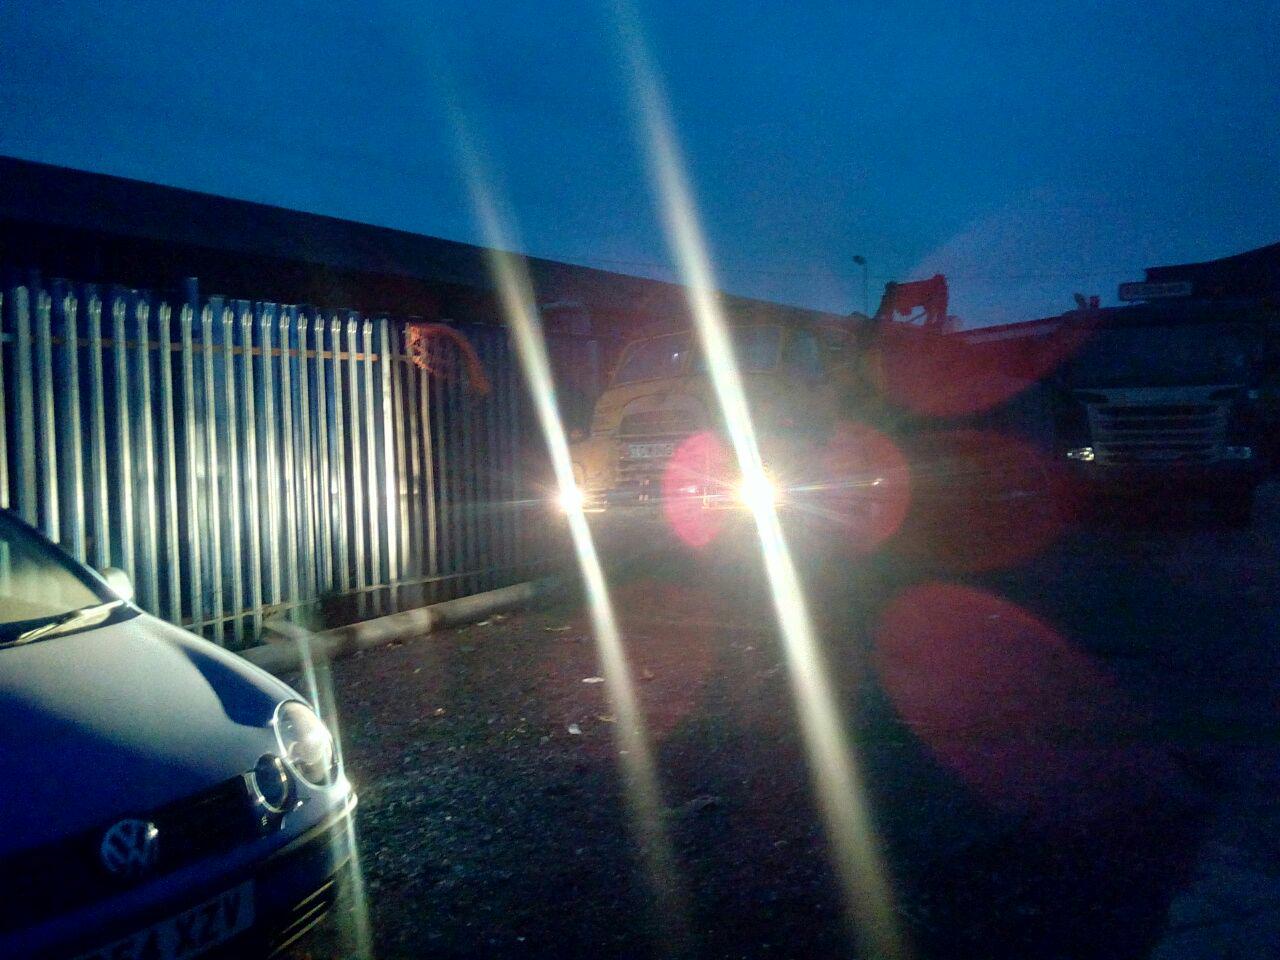 A poor-quality photograph of the truck parked in a dark storage
yard, with the headlights on. The light from the headlights is
smearing all over the photograph.